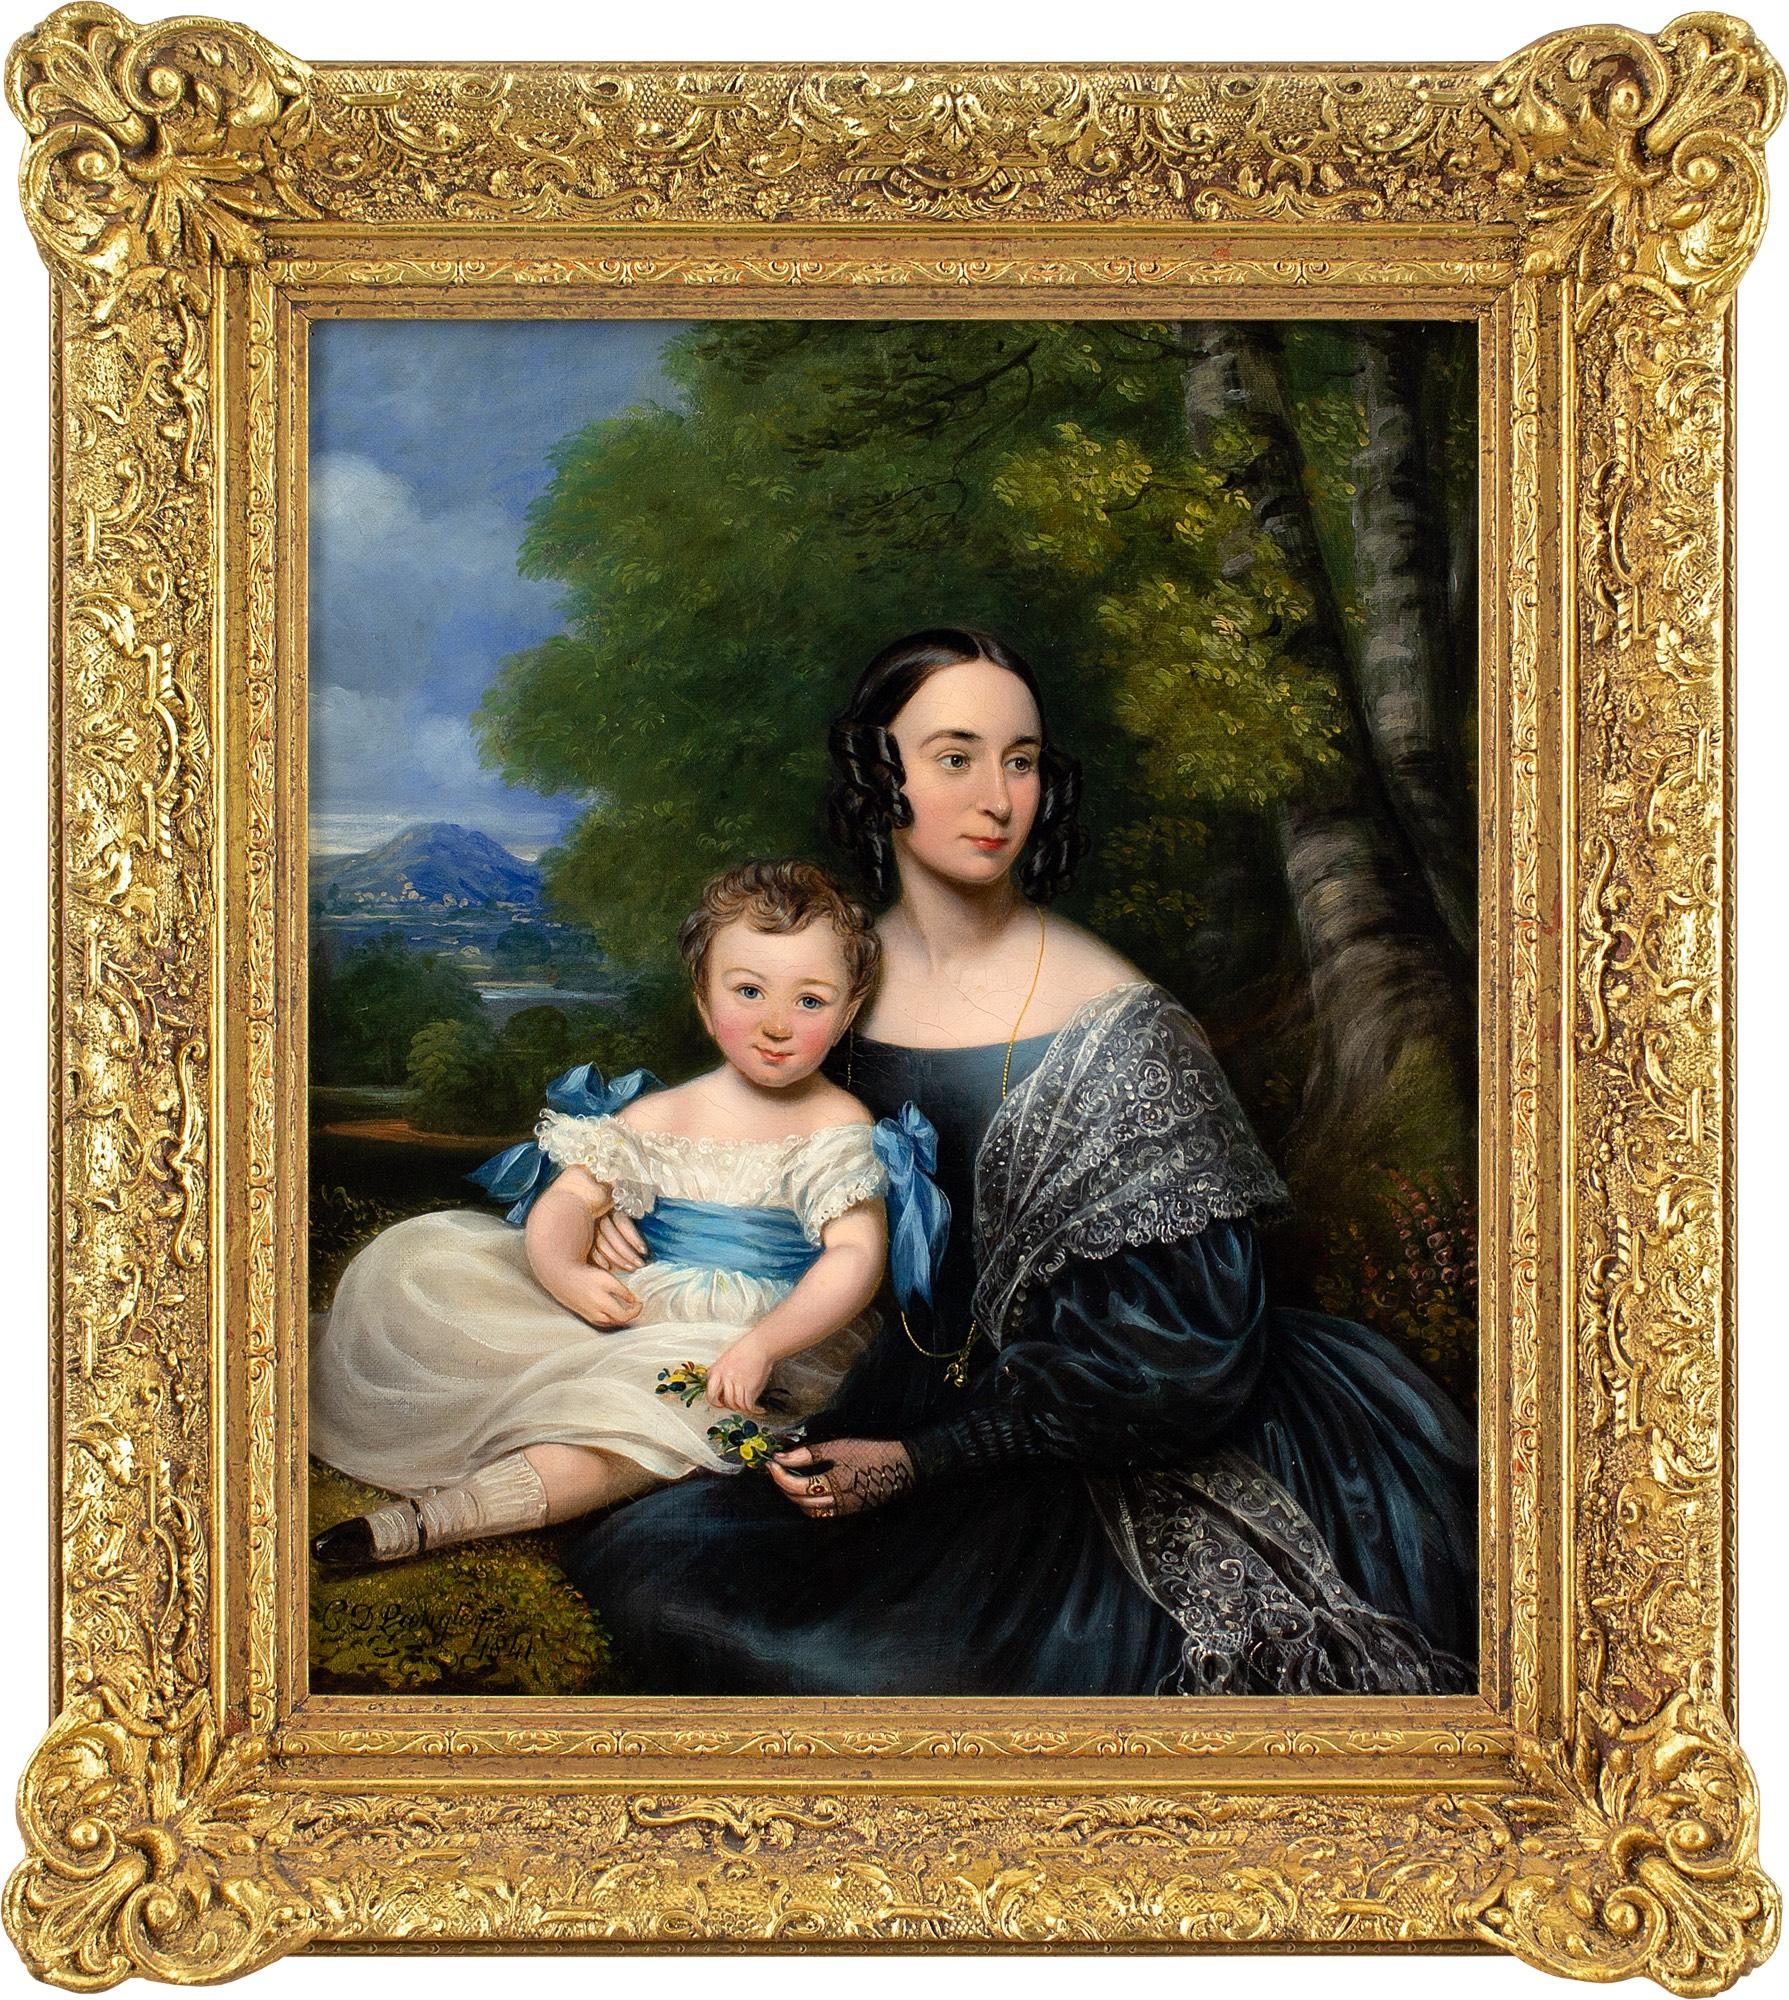 This beautiful mid-19th-century oil painting by British artist Charles Dickinson Langley (1799-1873) depicts a mother and child before a landscape.

Little is known about Langley, which is unusual given his extraordinary ability. It’s apparent that